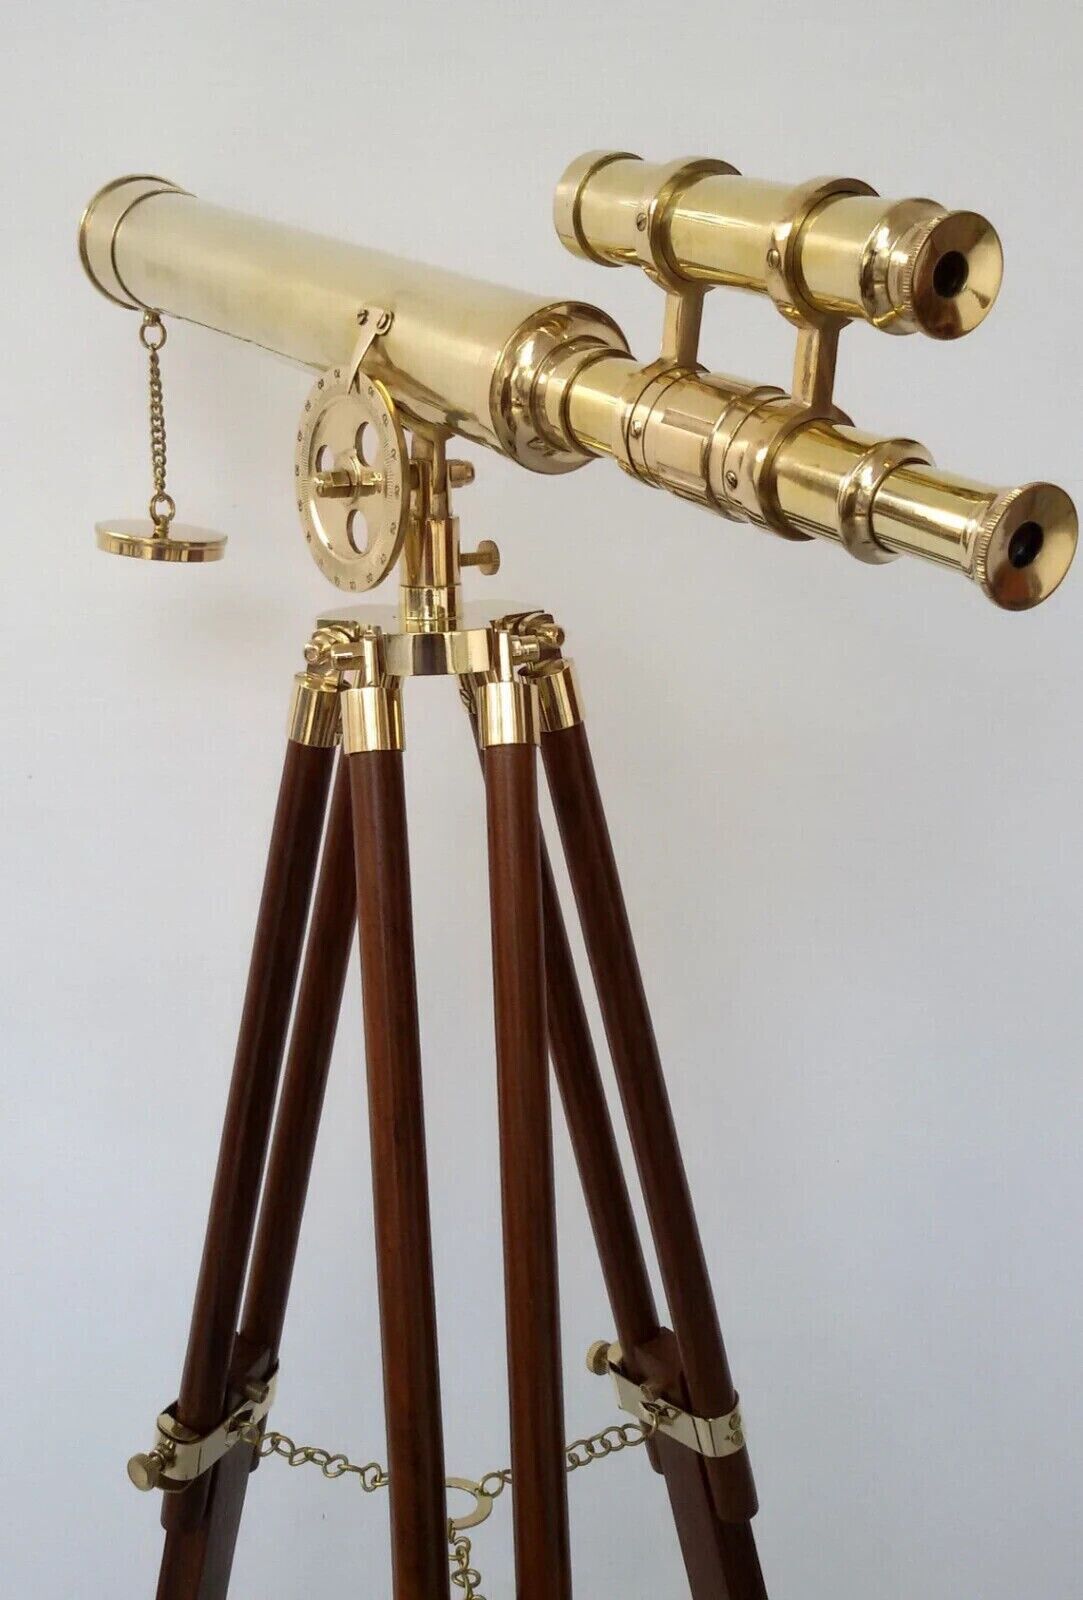 Double Barrel Antique Telescope Golden Finish Tripod Stand For Adults Astronomy